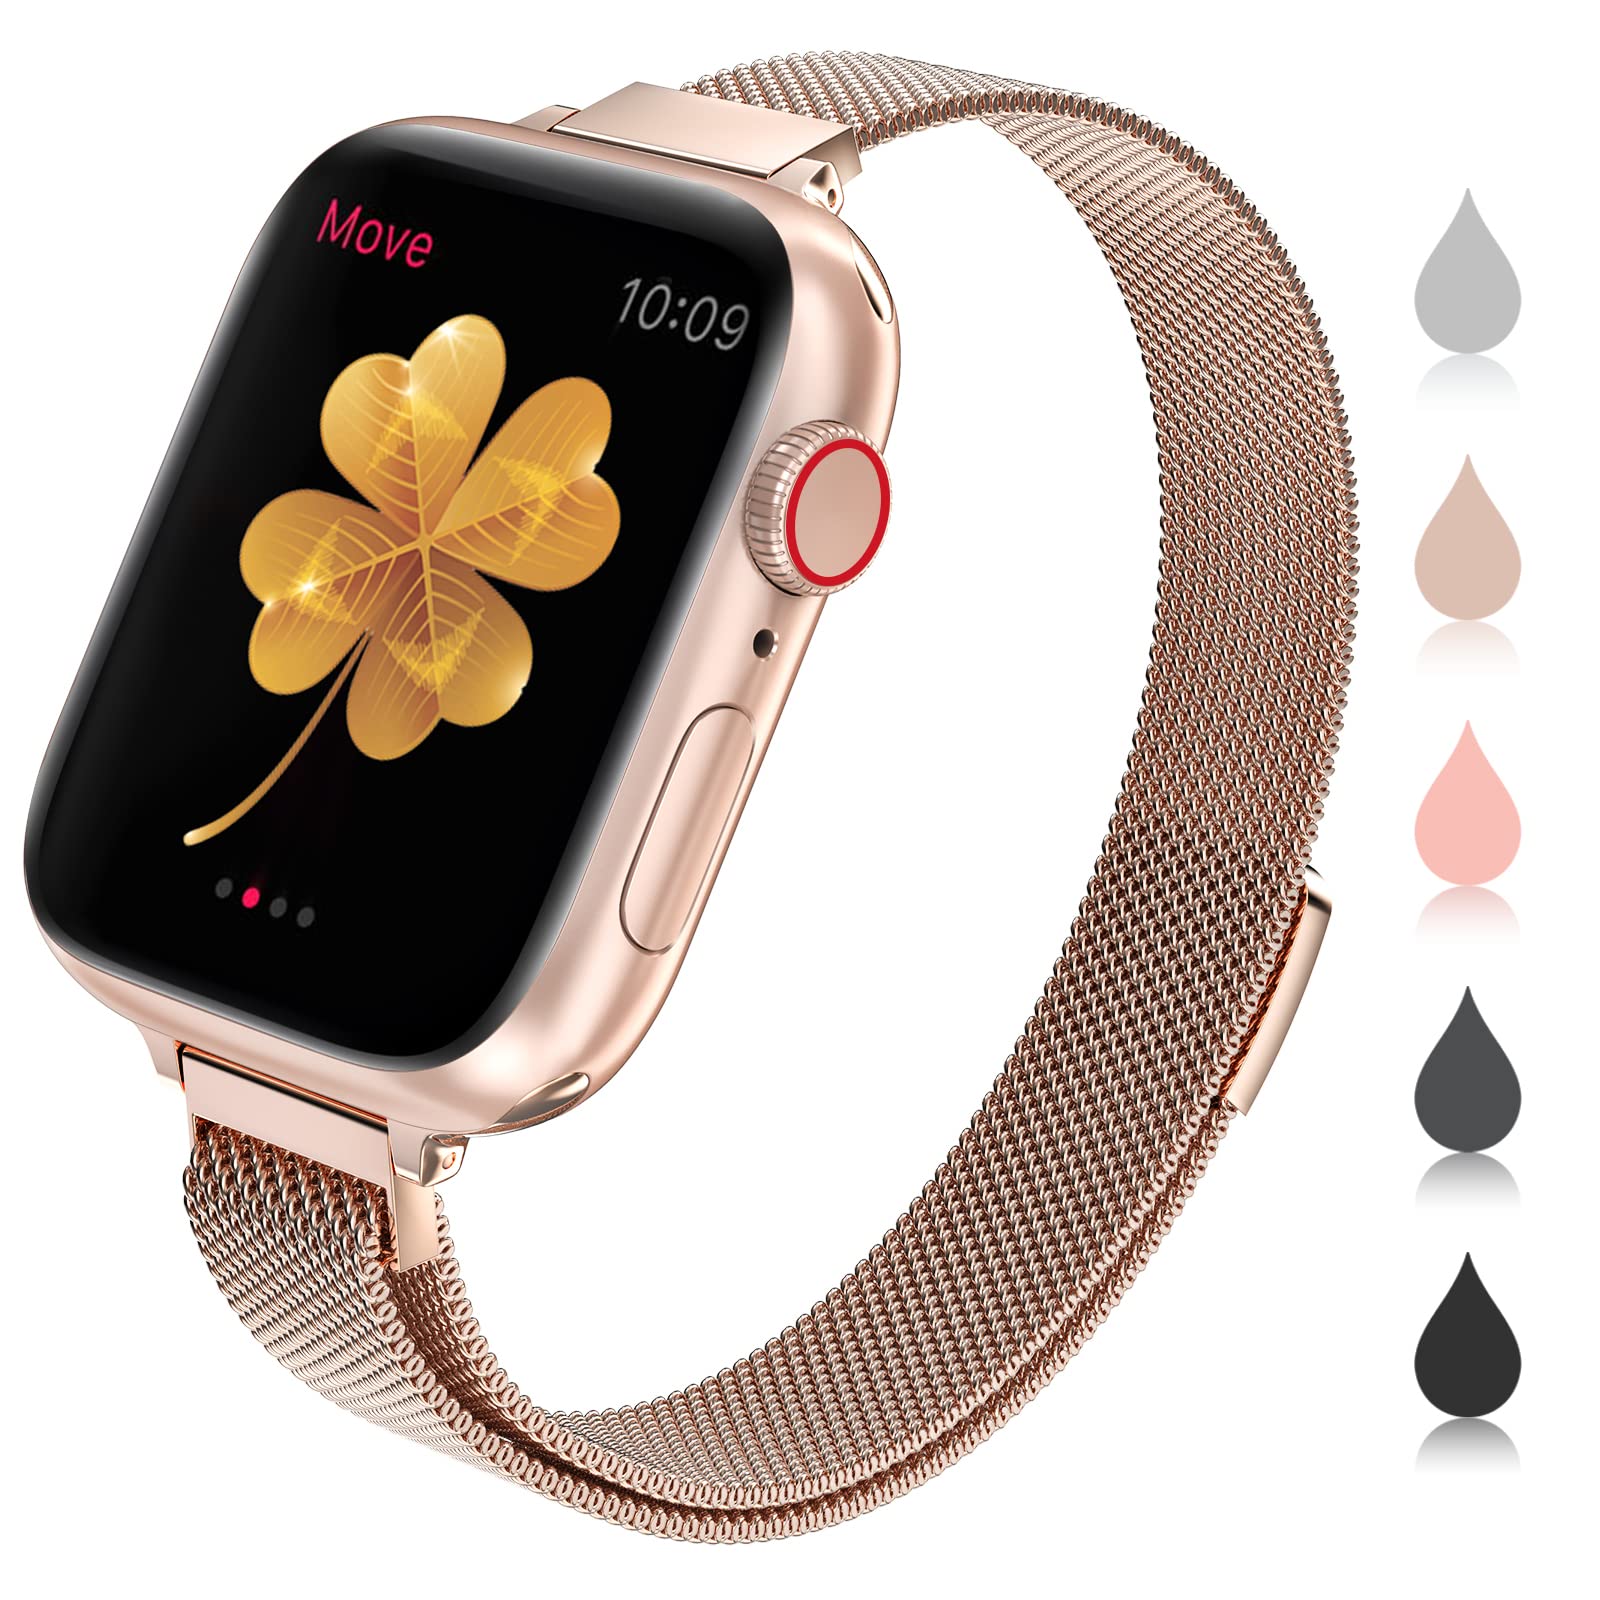  VSANT Compatible With Apple Watch Band 38mm 40mm 41mm Women  Girl,Shiny Golden Braided Solo Loop Stretchy Bands Adjustable with  Butterfly Charms for iWatch 1 2 3 4 5 6 7 8 SE : Cell Phones & Accessories